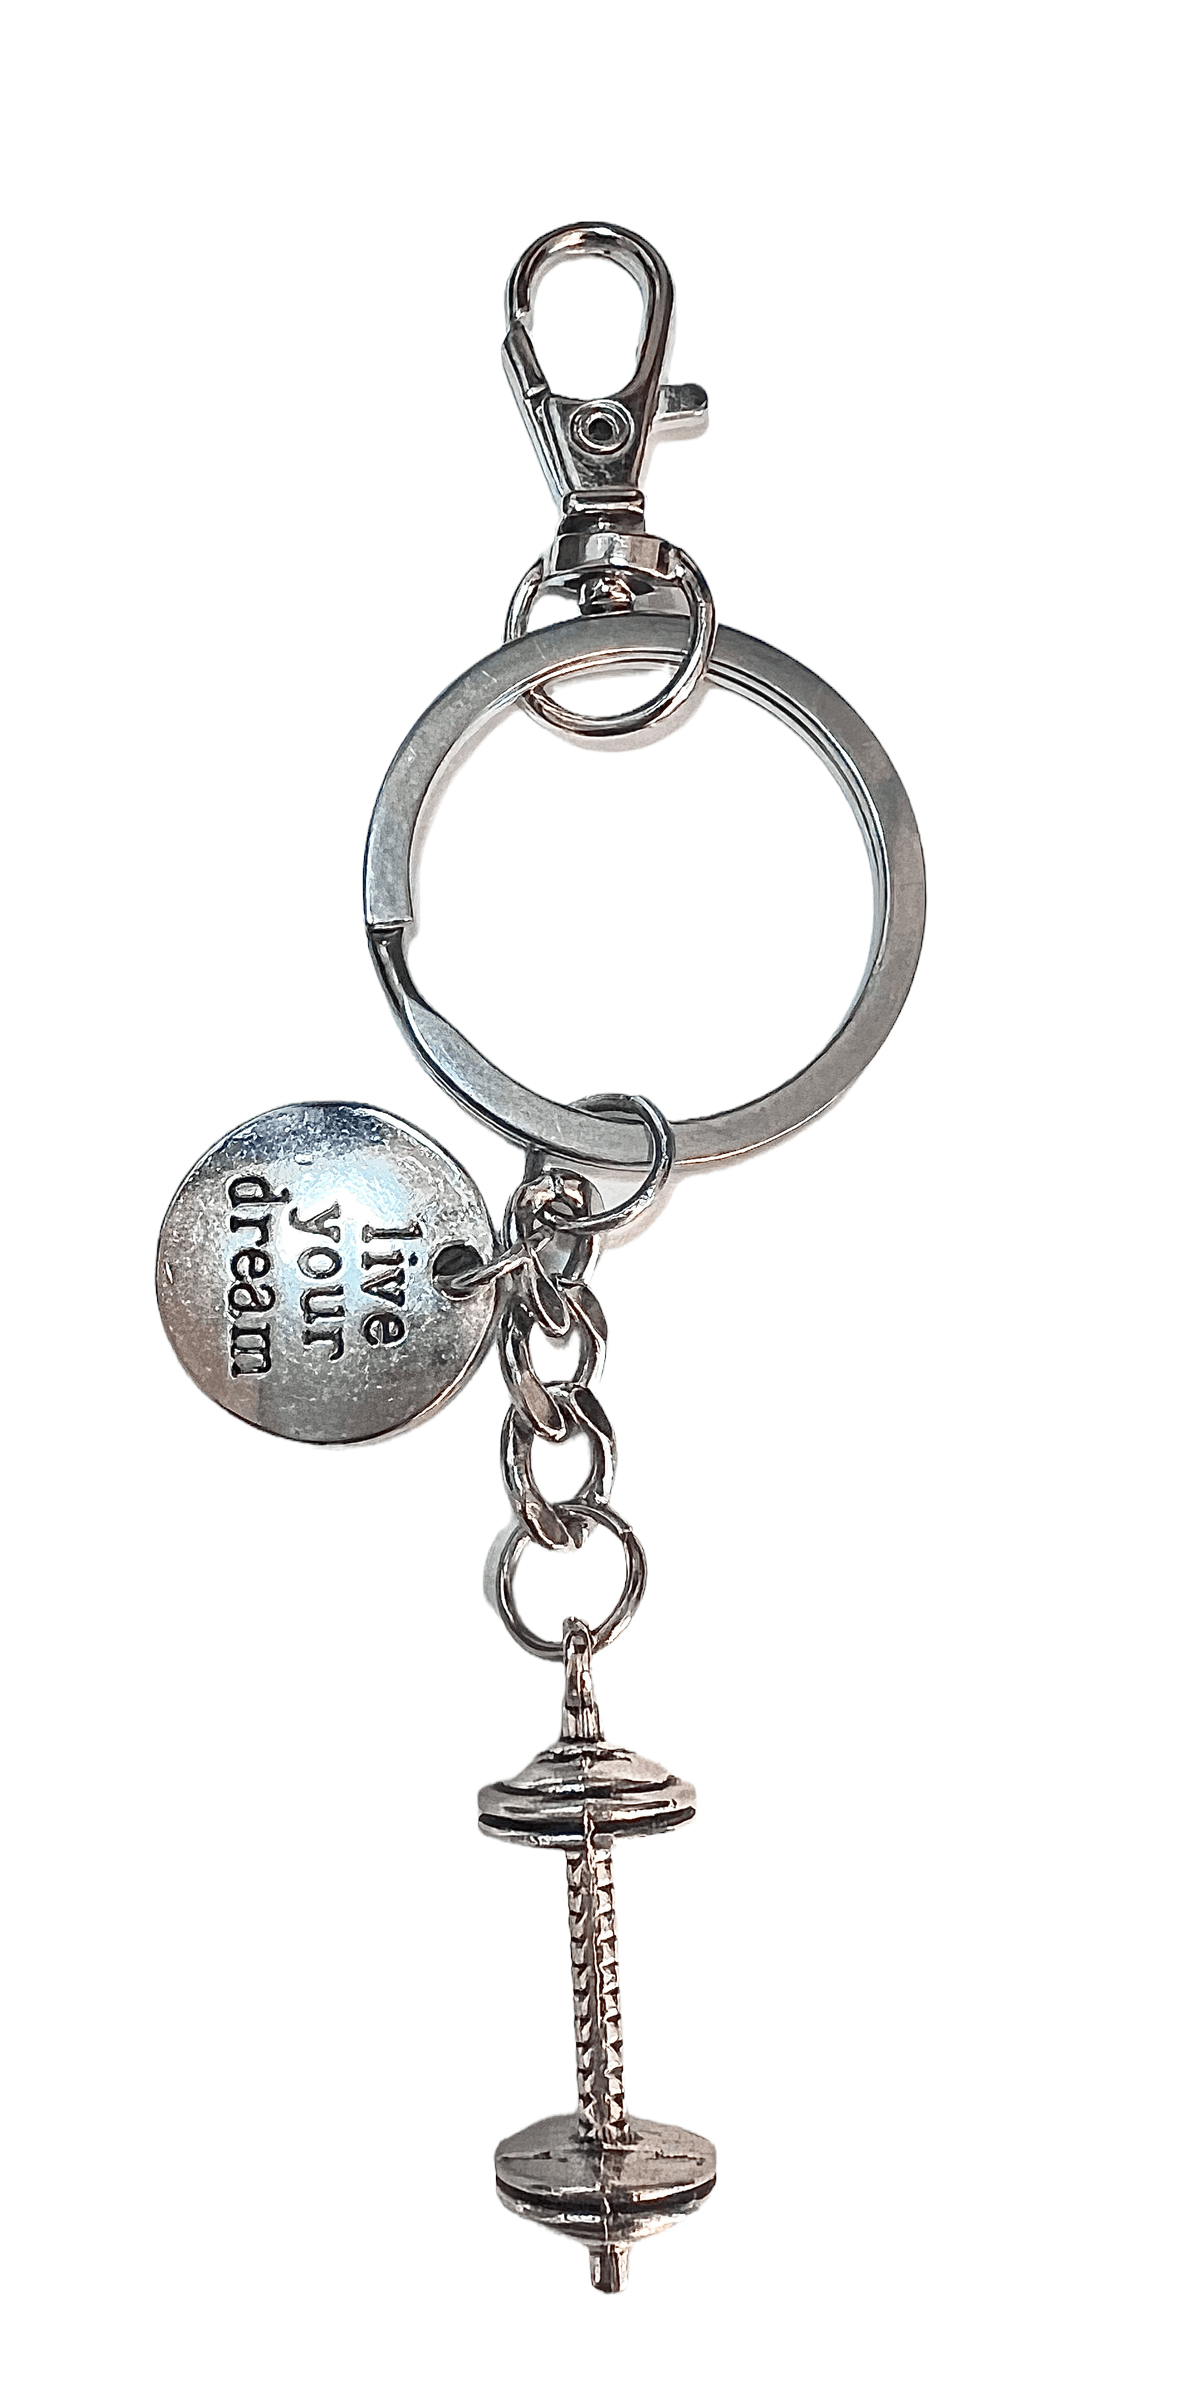 Stainless Steel Dumbbell key chain live your dream quote - Brent's Bling